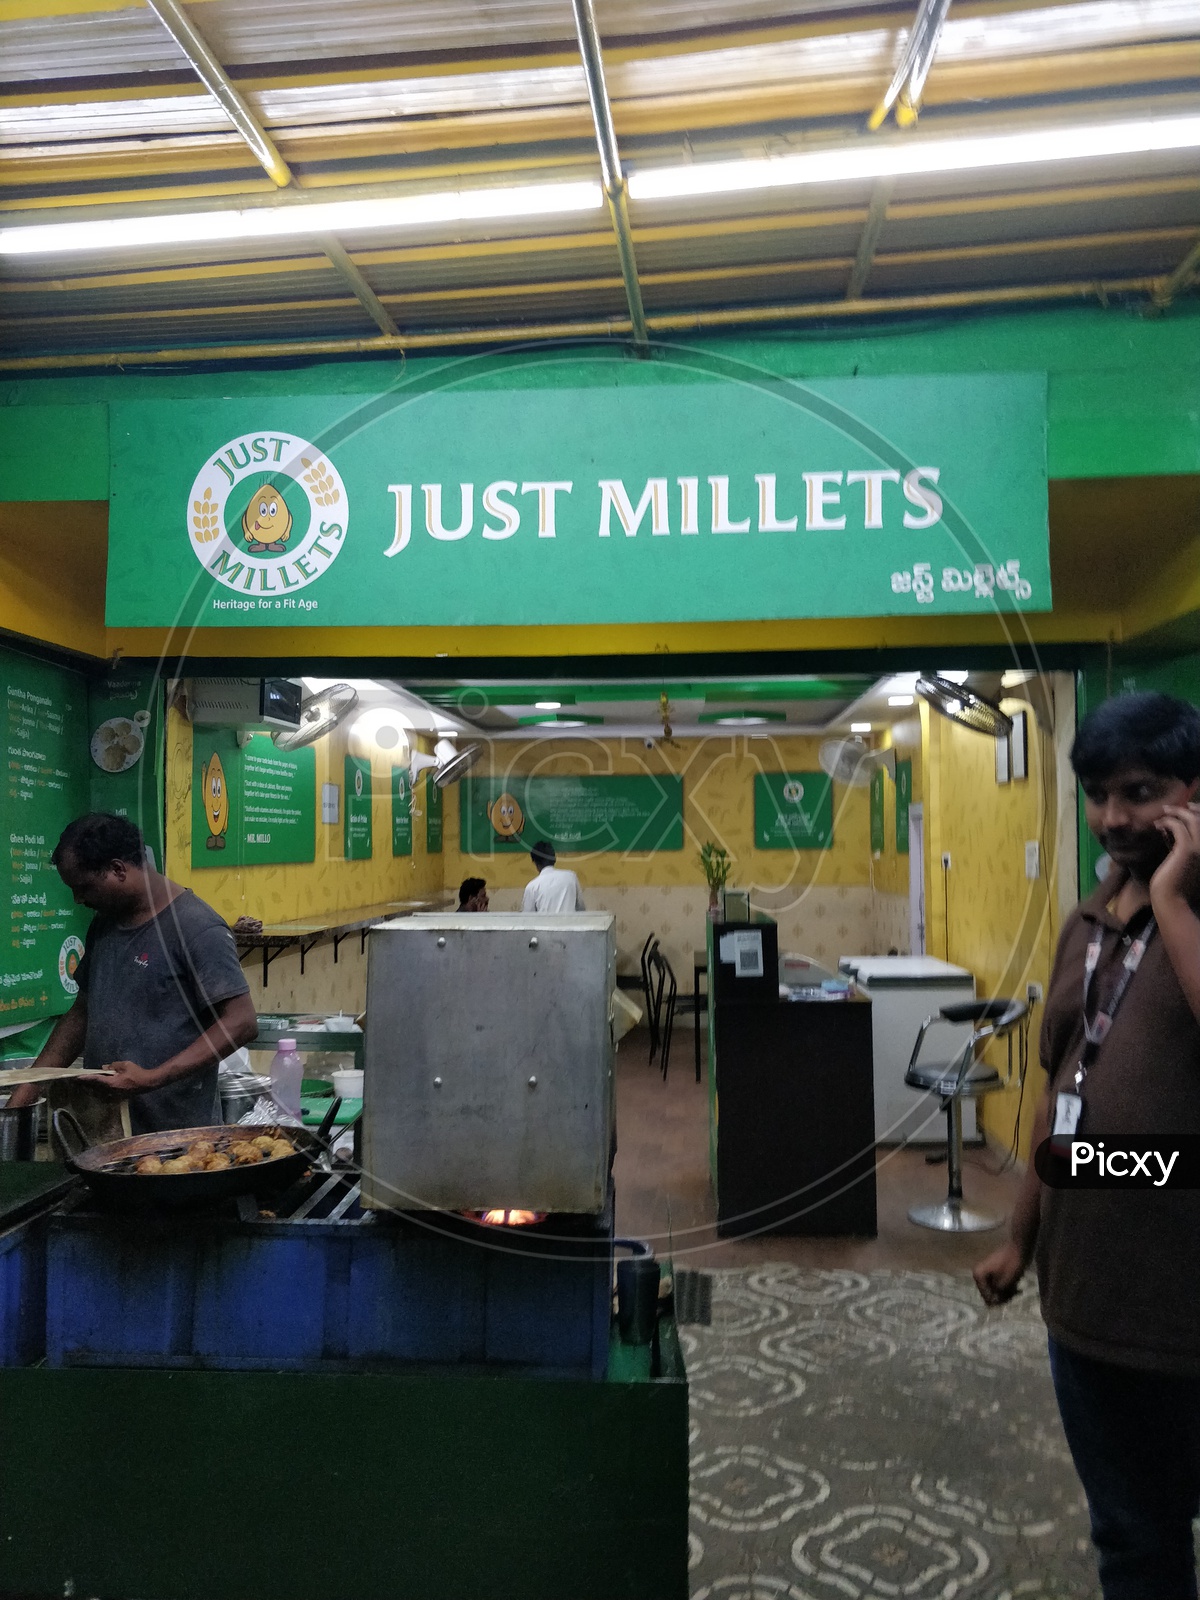 Just millets shop which has organic food